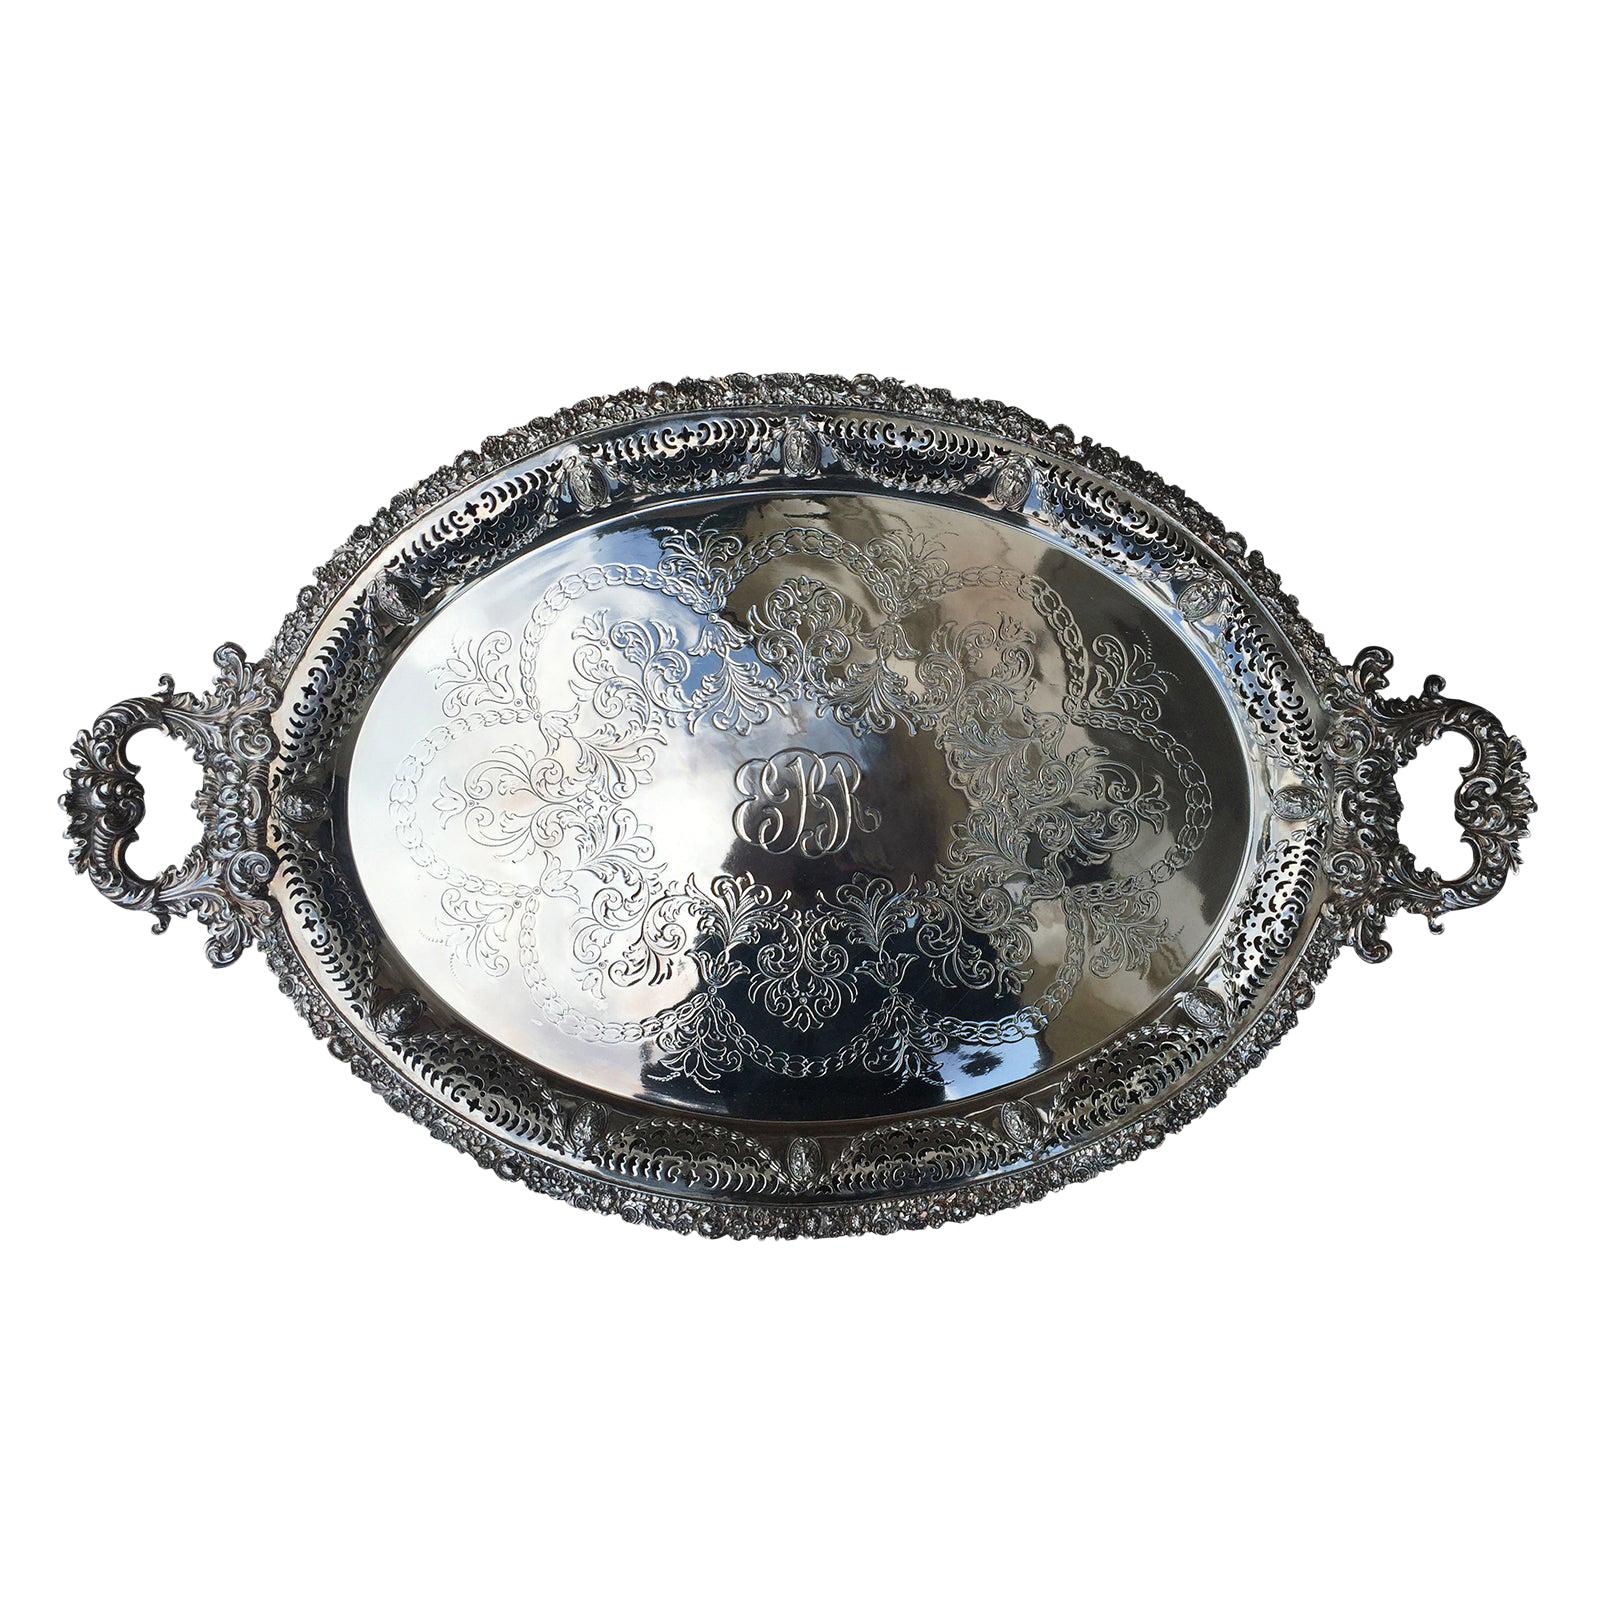 Large 20th Century English Silver Tray by Ellis-Barker, Marked